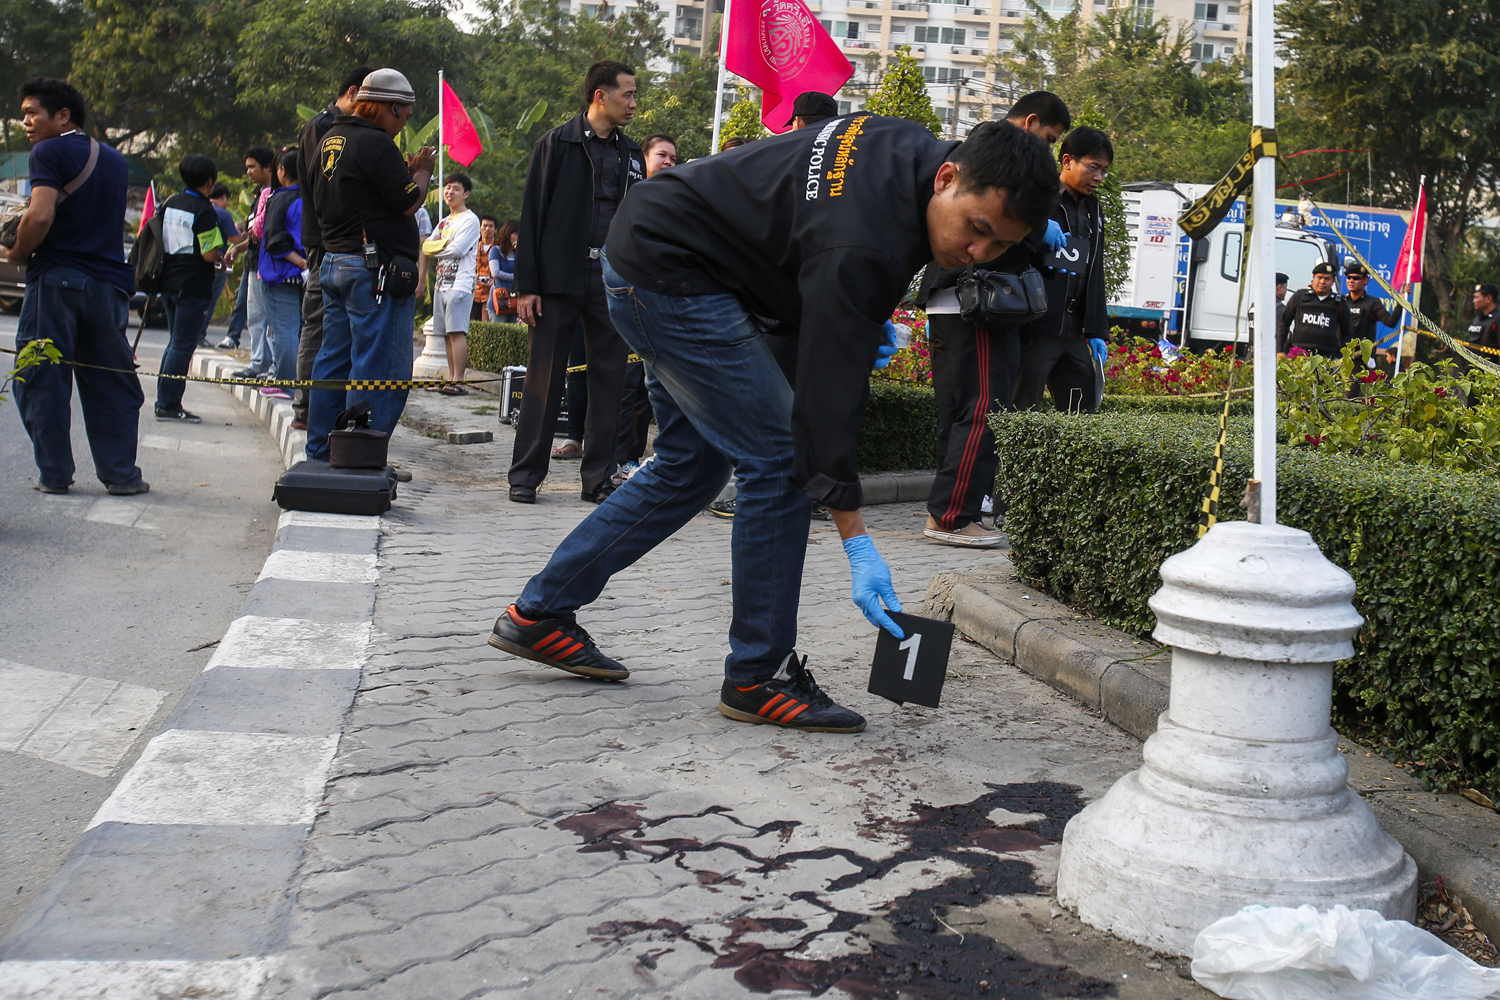 A forensic police officer drops a marker next to blood at the site of what police say was clashes between anti-government protesters and supporters of PM Yingluck Shinawatra in Bangkok